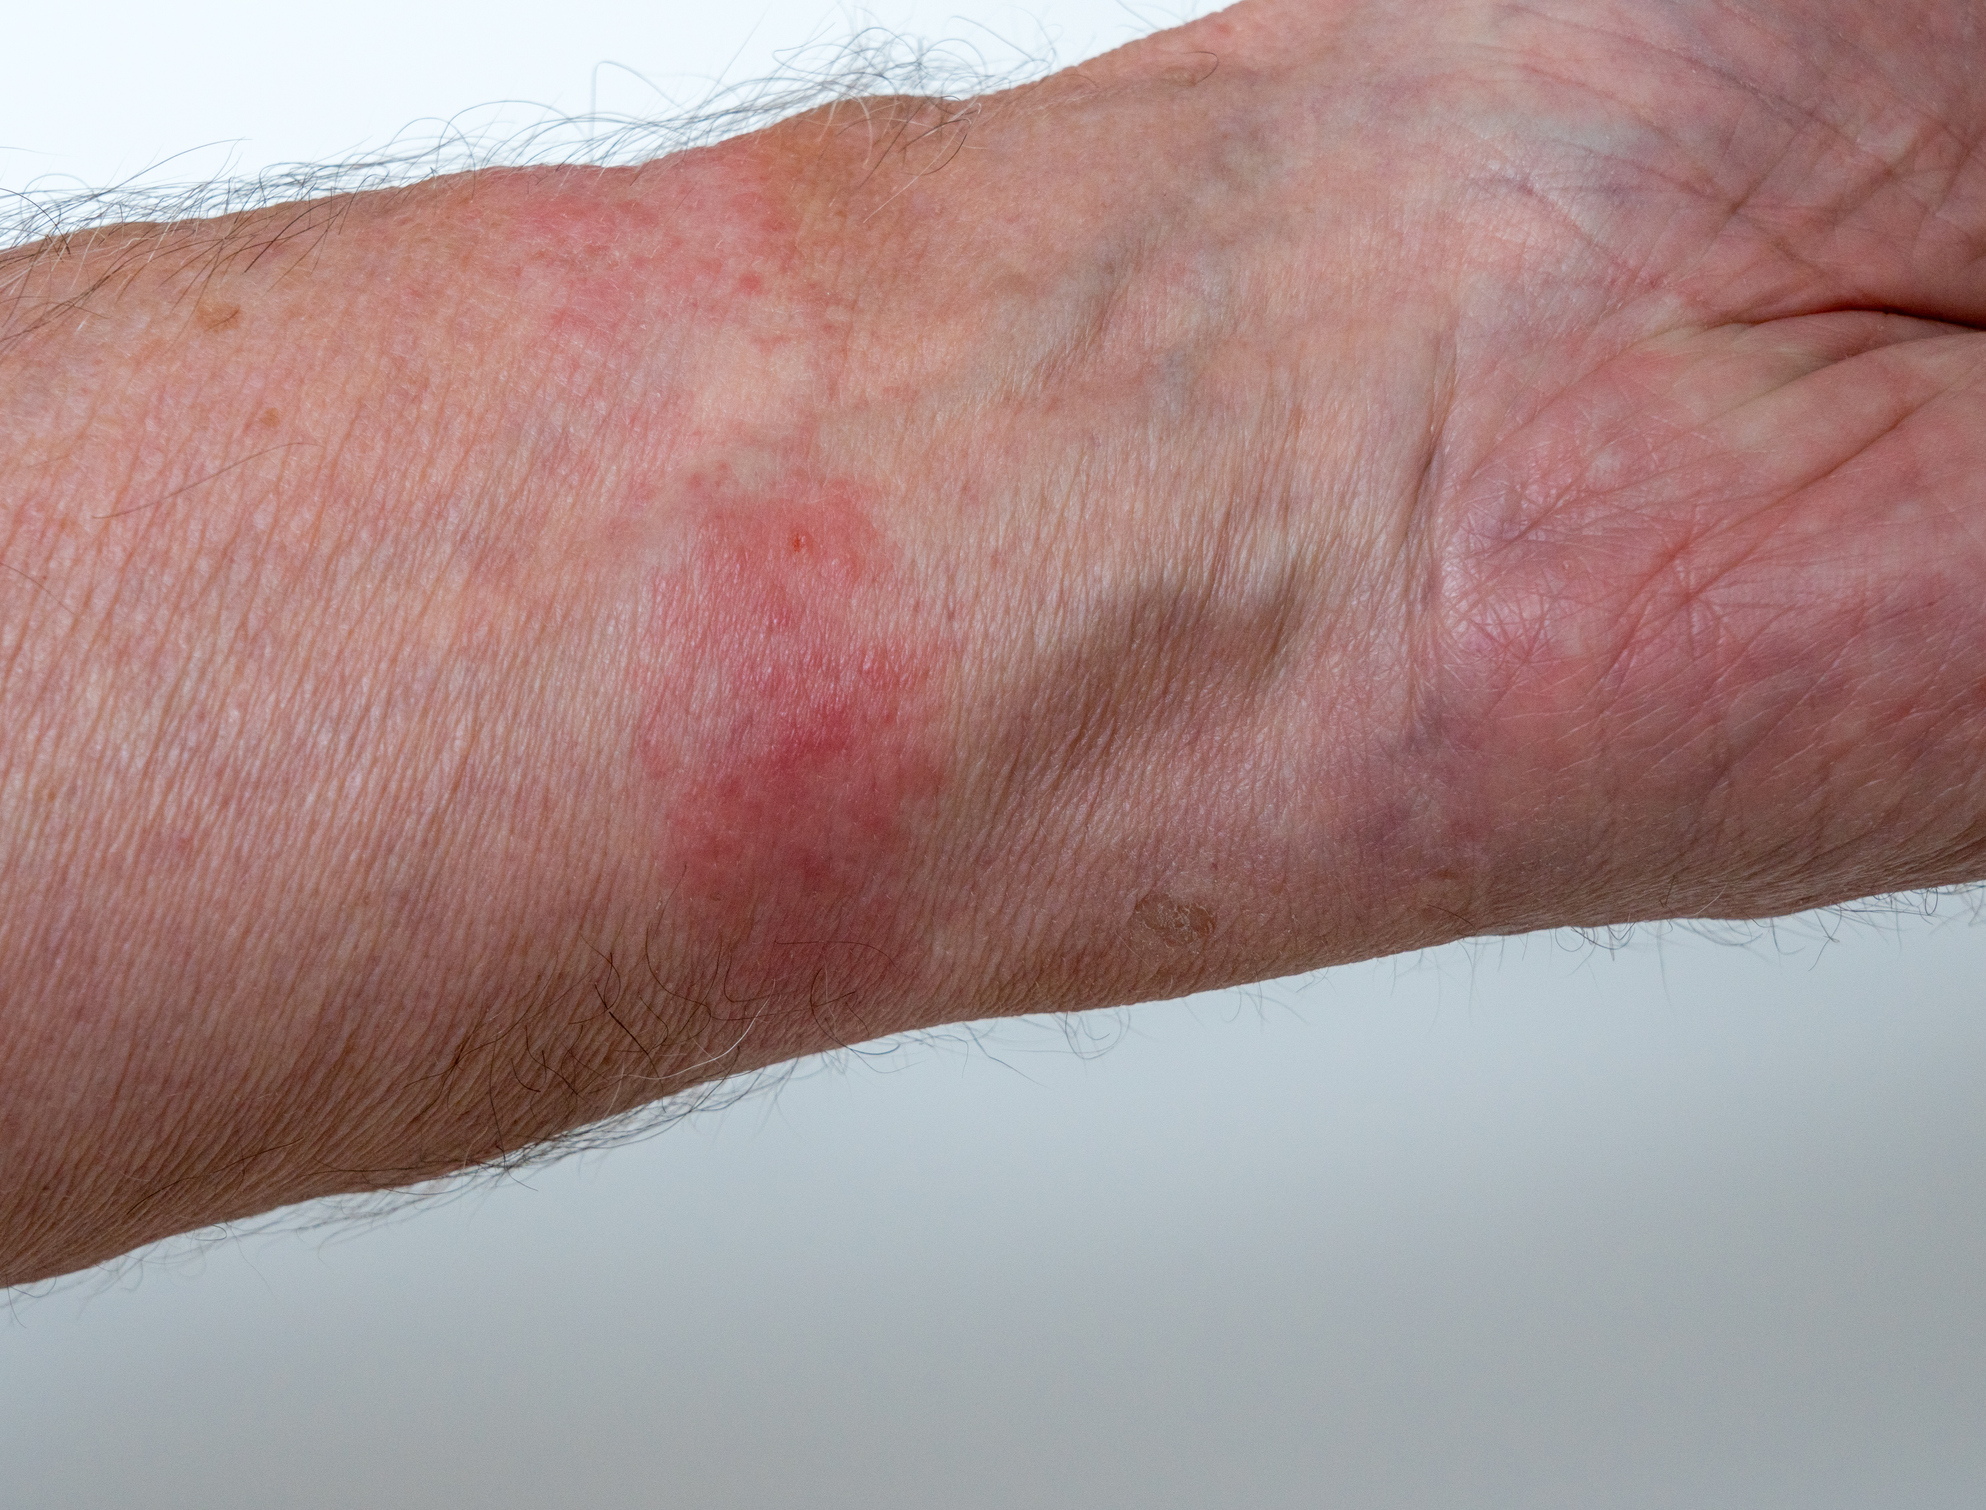 Contact dermatitis on the hands